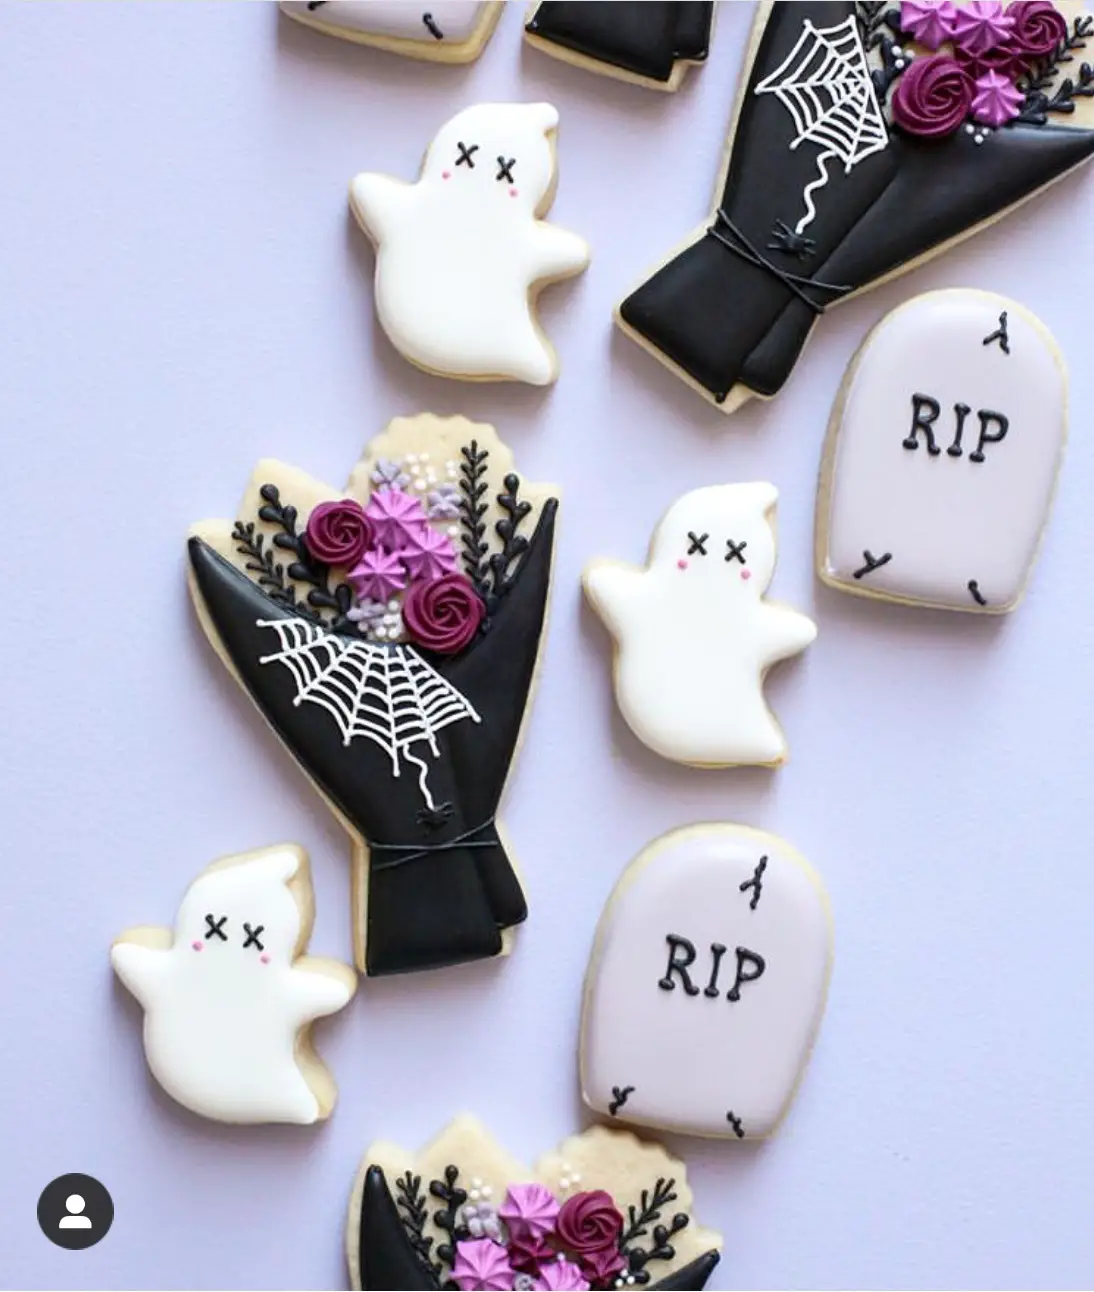 30 Halloween Cookies To Put A Spooky Spin On Your Halloween Treats ...